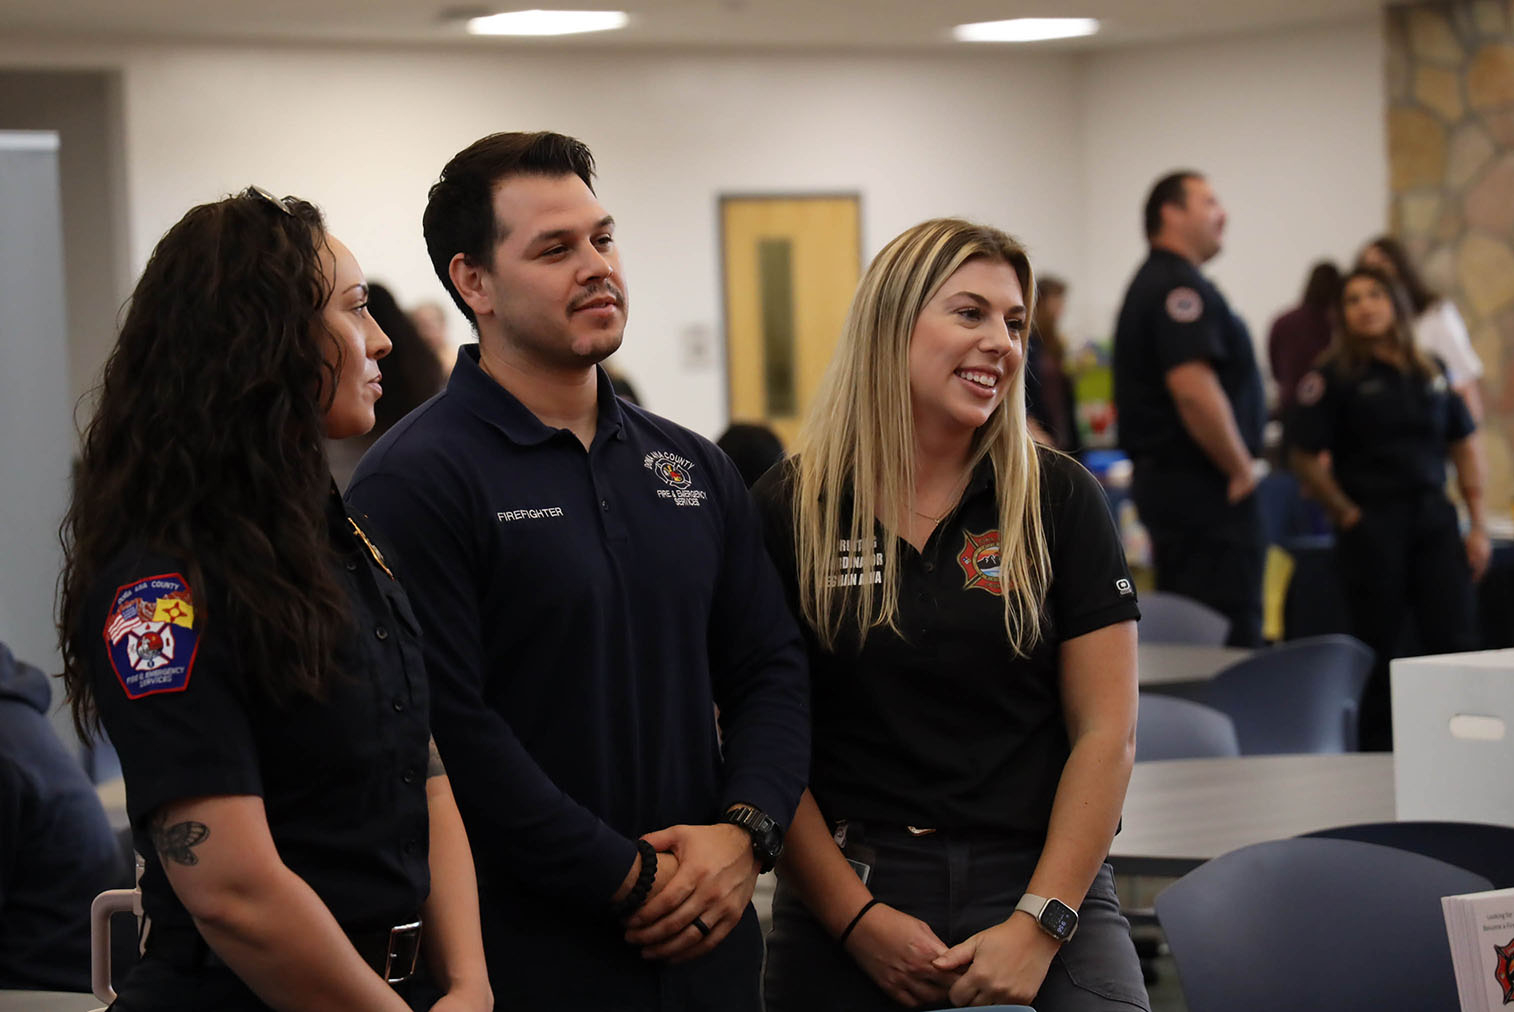 A trio from Dona Ana County's fire department poses for the camera.